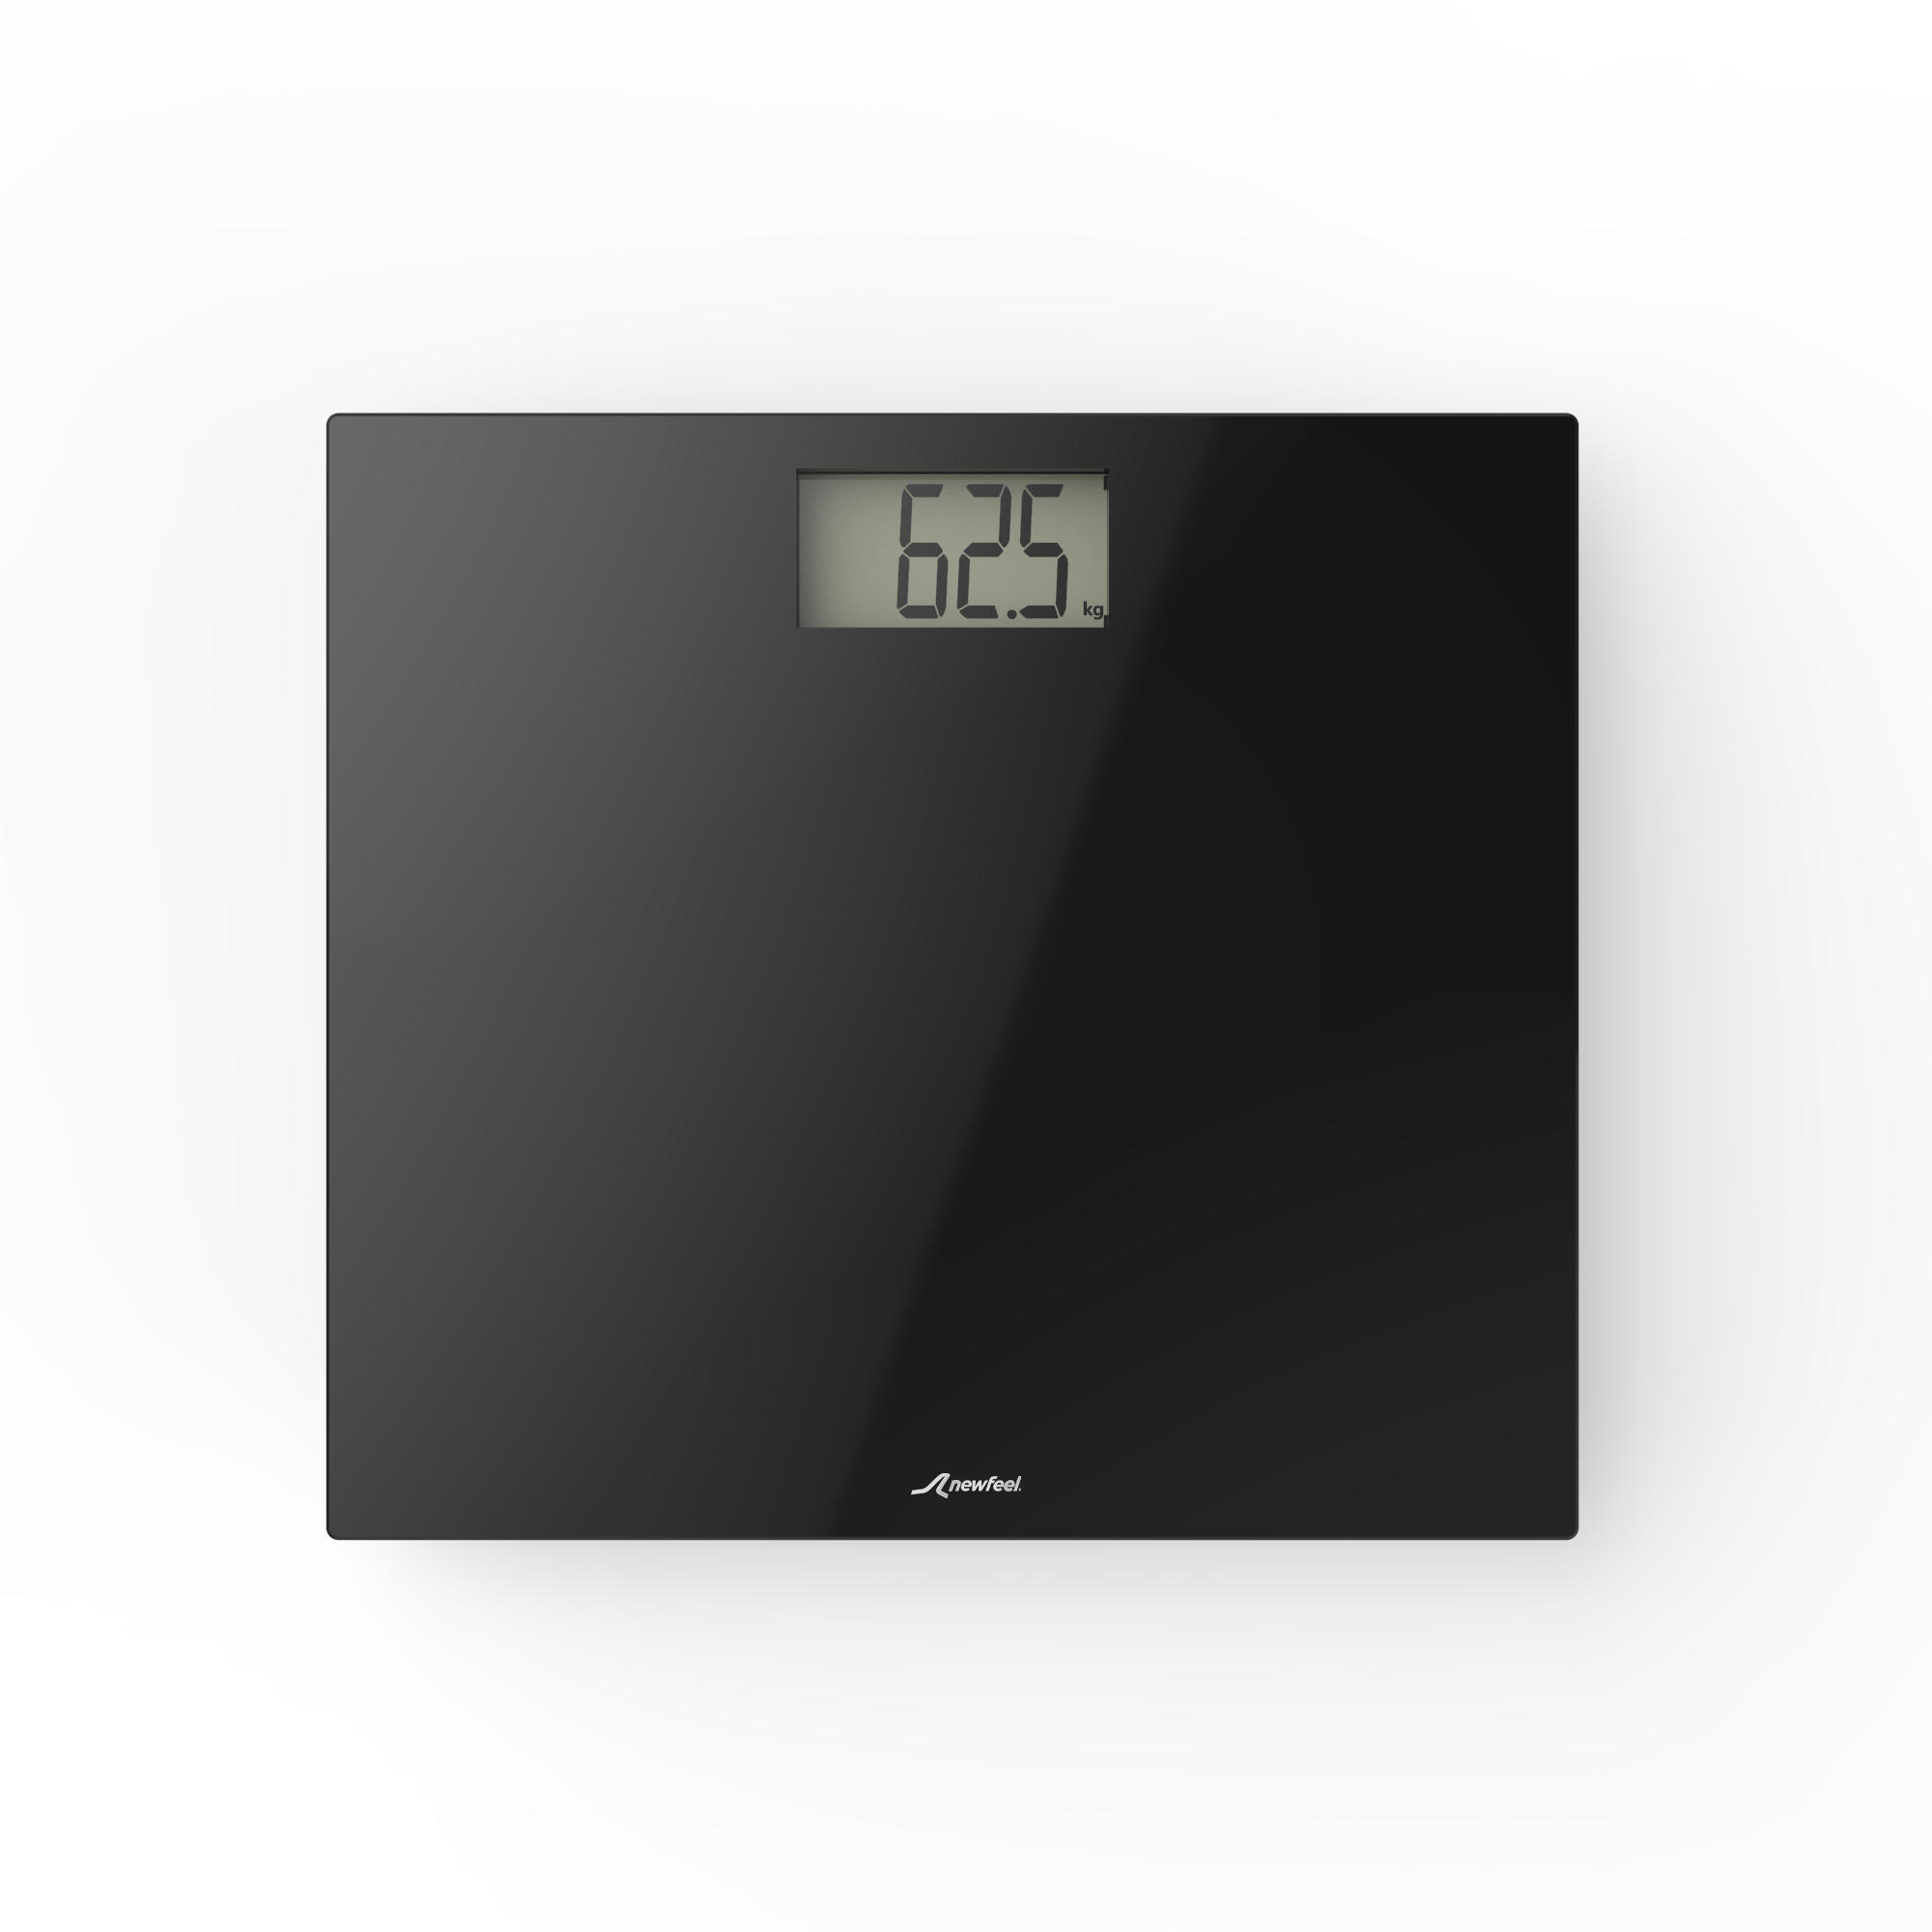 Bathroom and Weight Scales